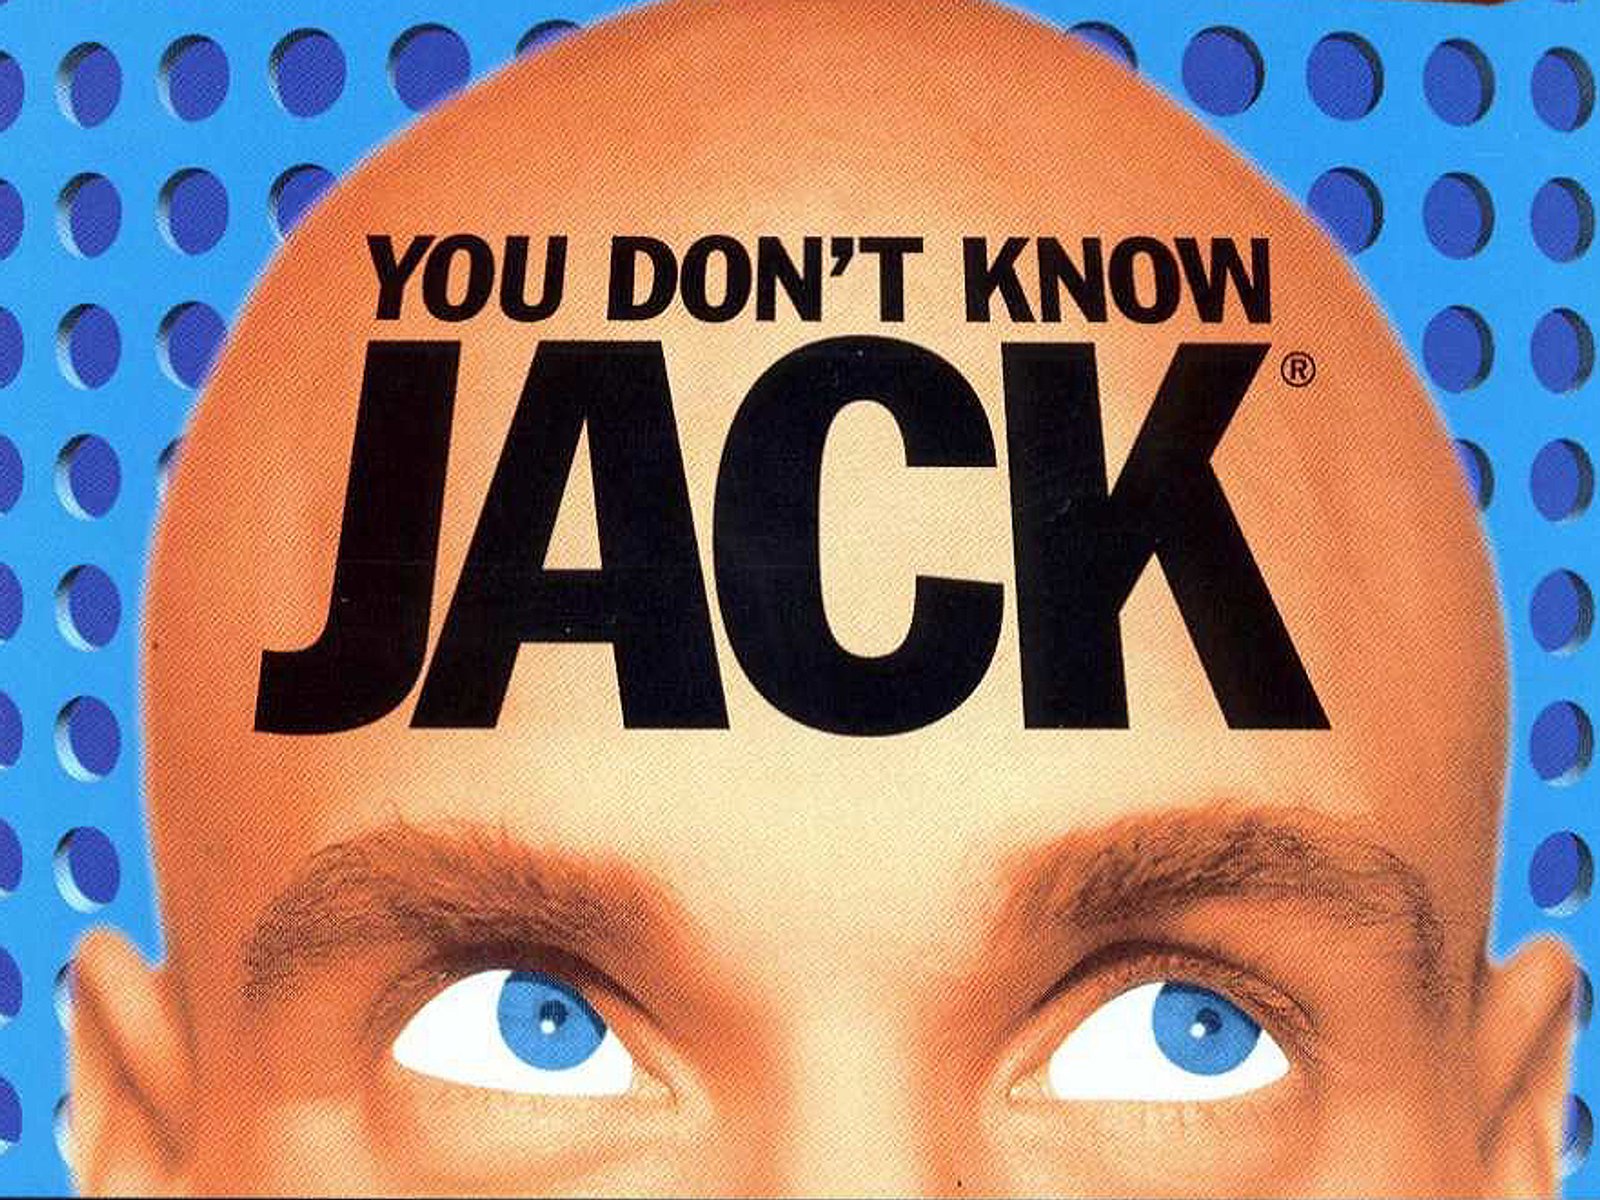 You don t know на русском. Didn't know Jack. You don t know. You don't know Jack 2015. You don't know Jack (2011 Video game).